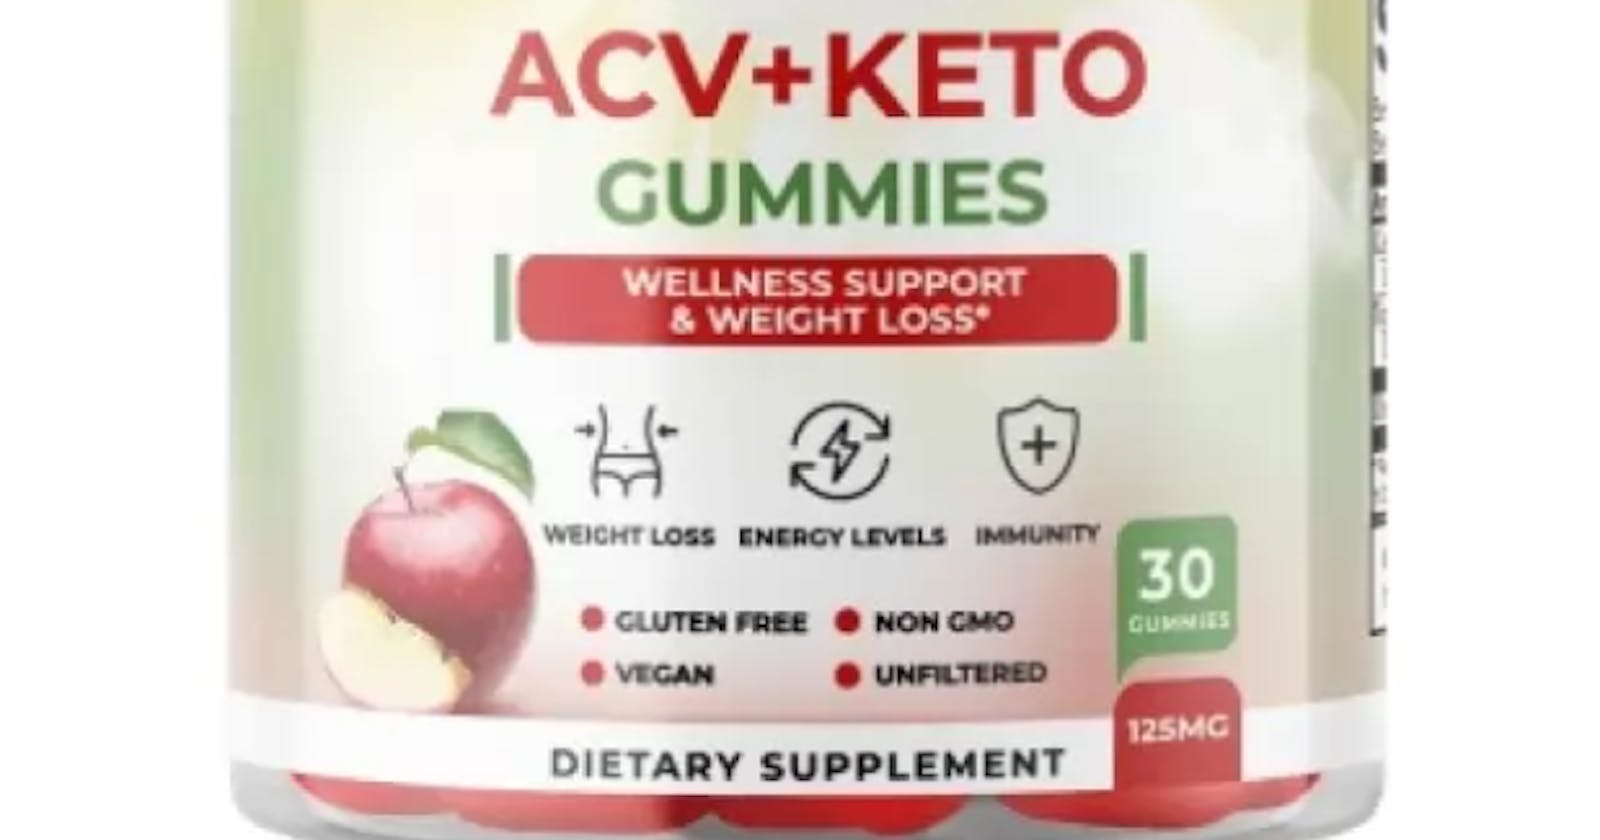 Platinum Label Keto ACV Gummies Reviews – Benefits, Weight Loss and Works?